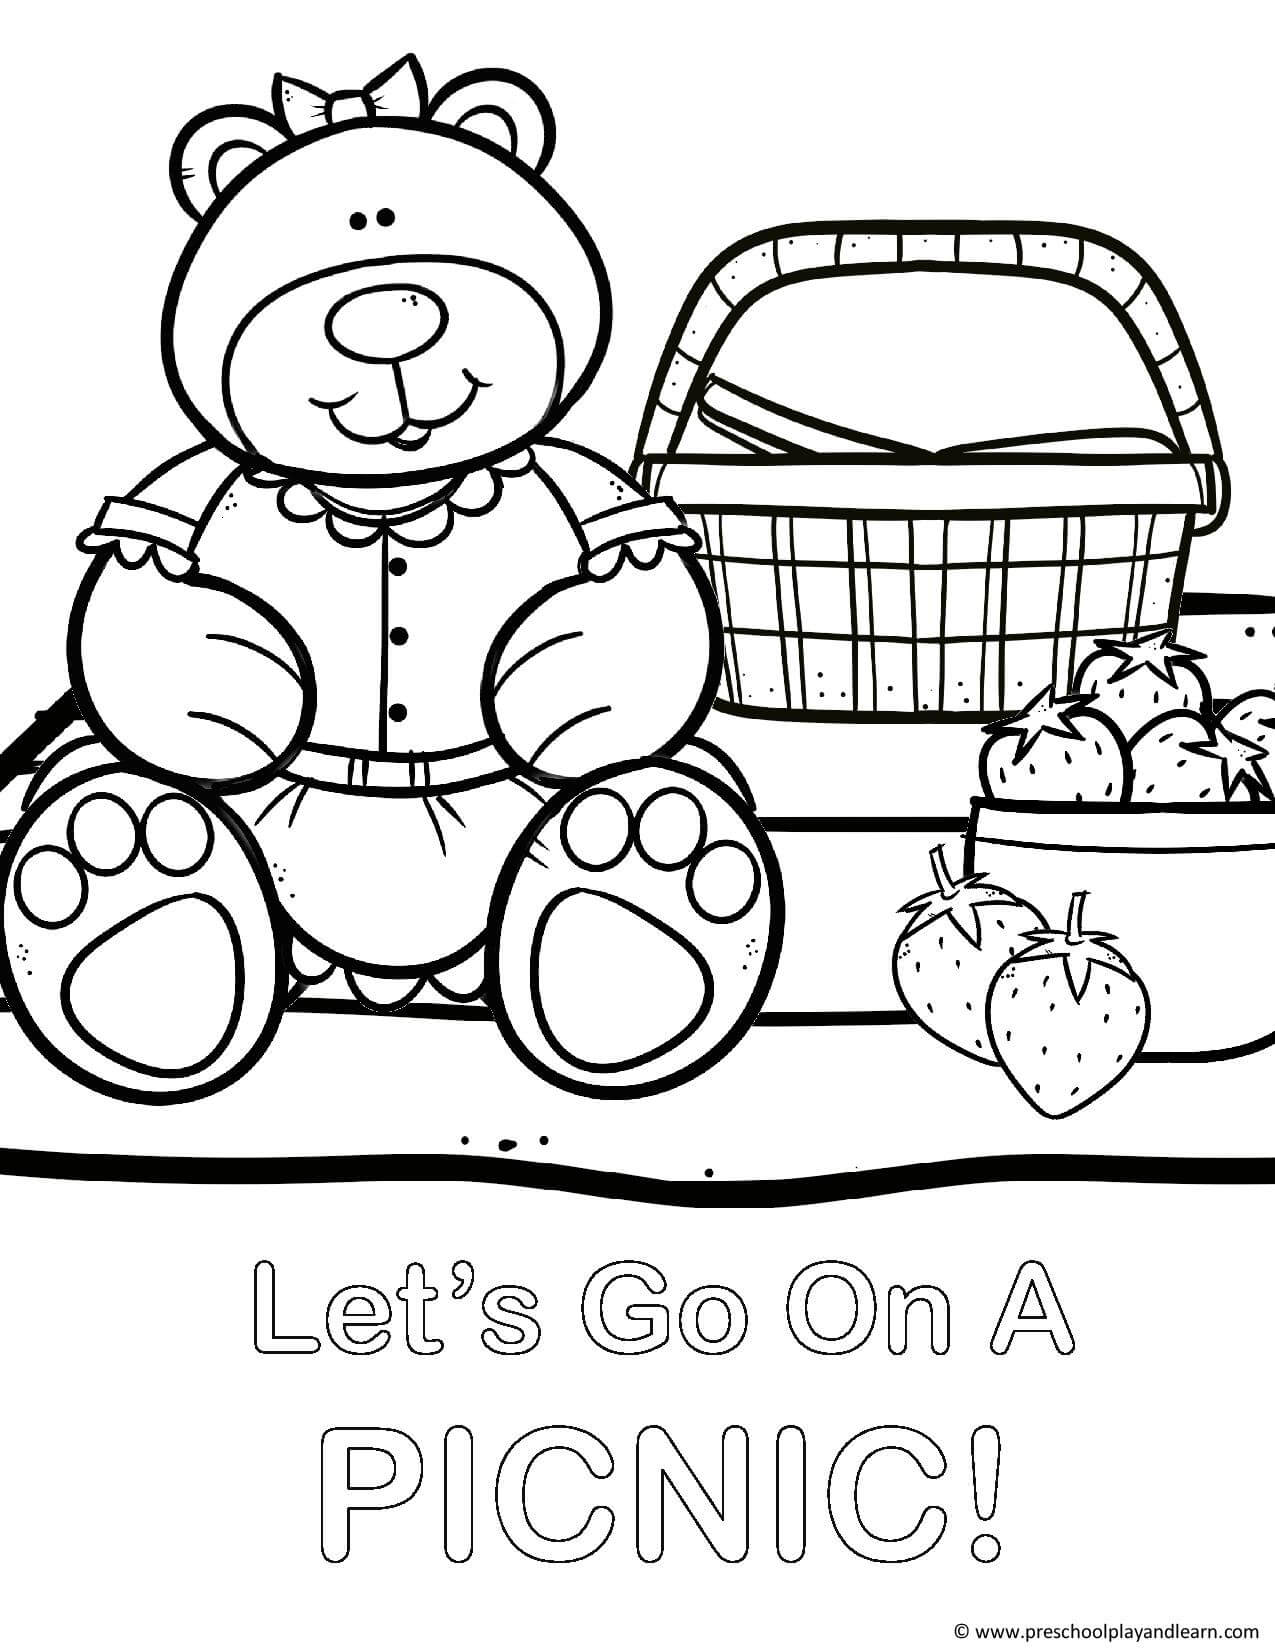 teddy bears coloring pages